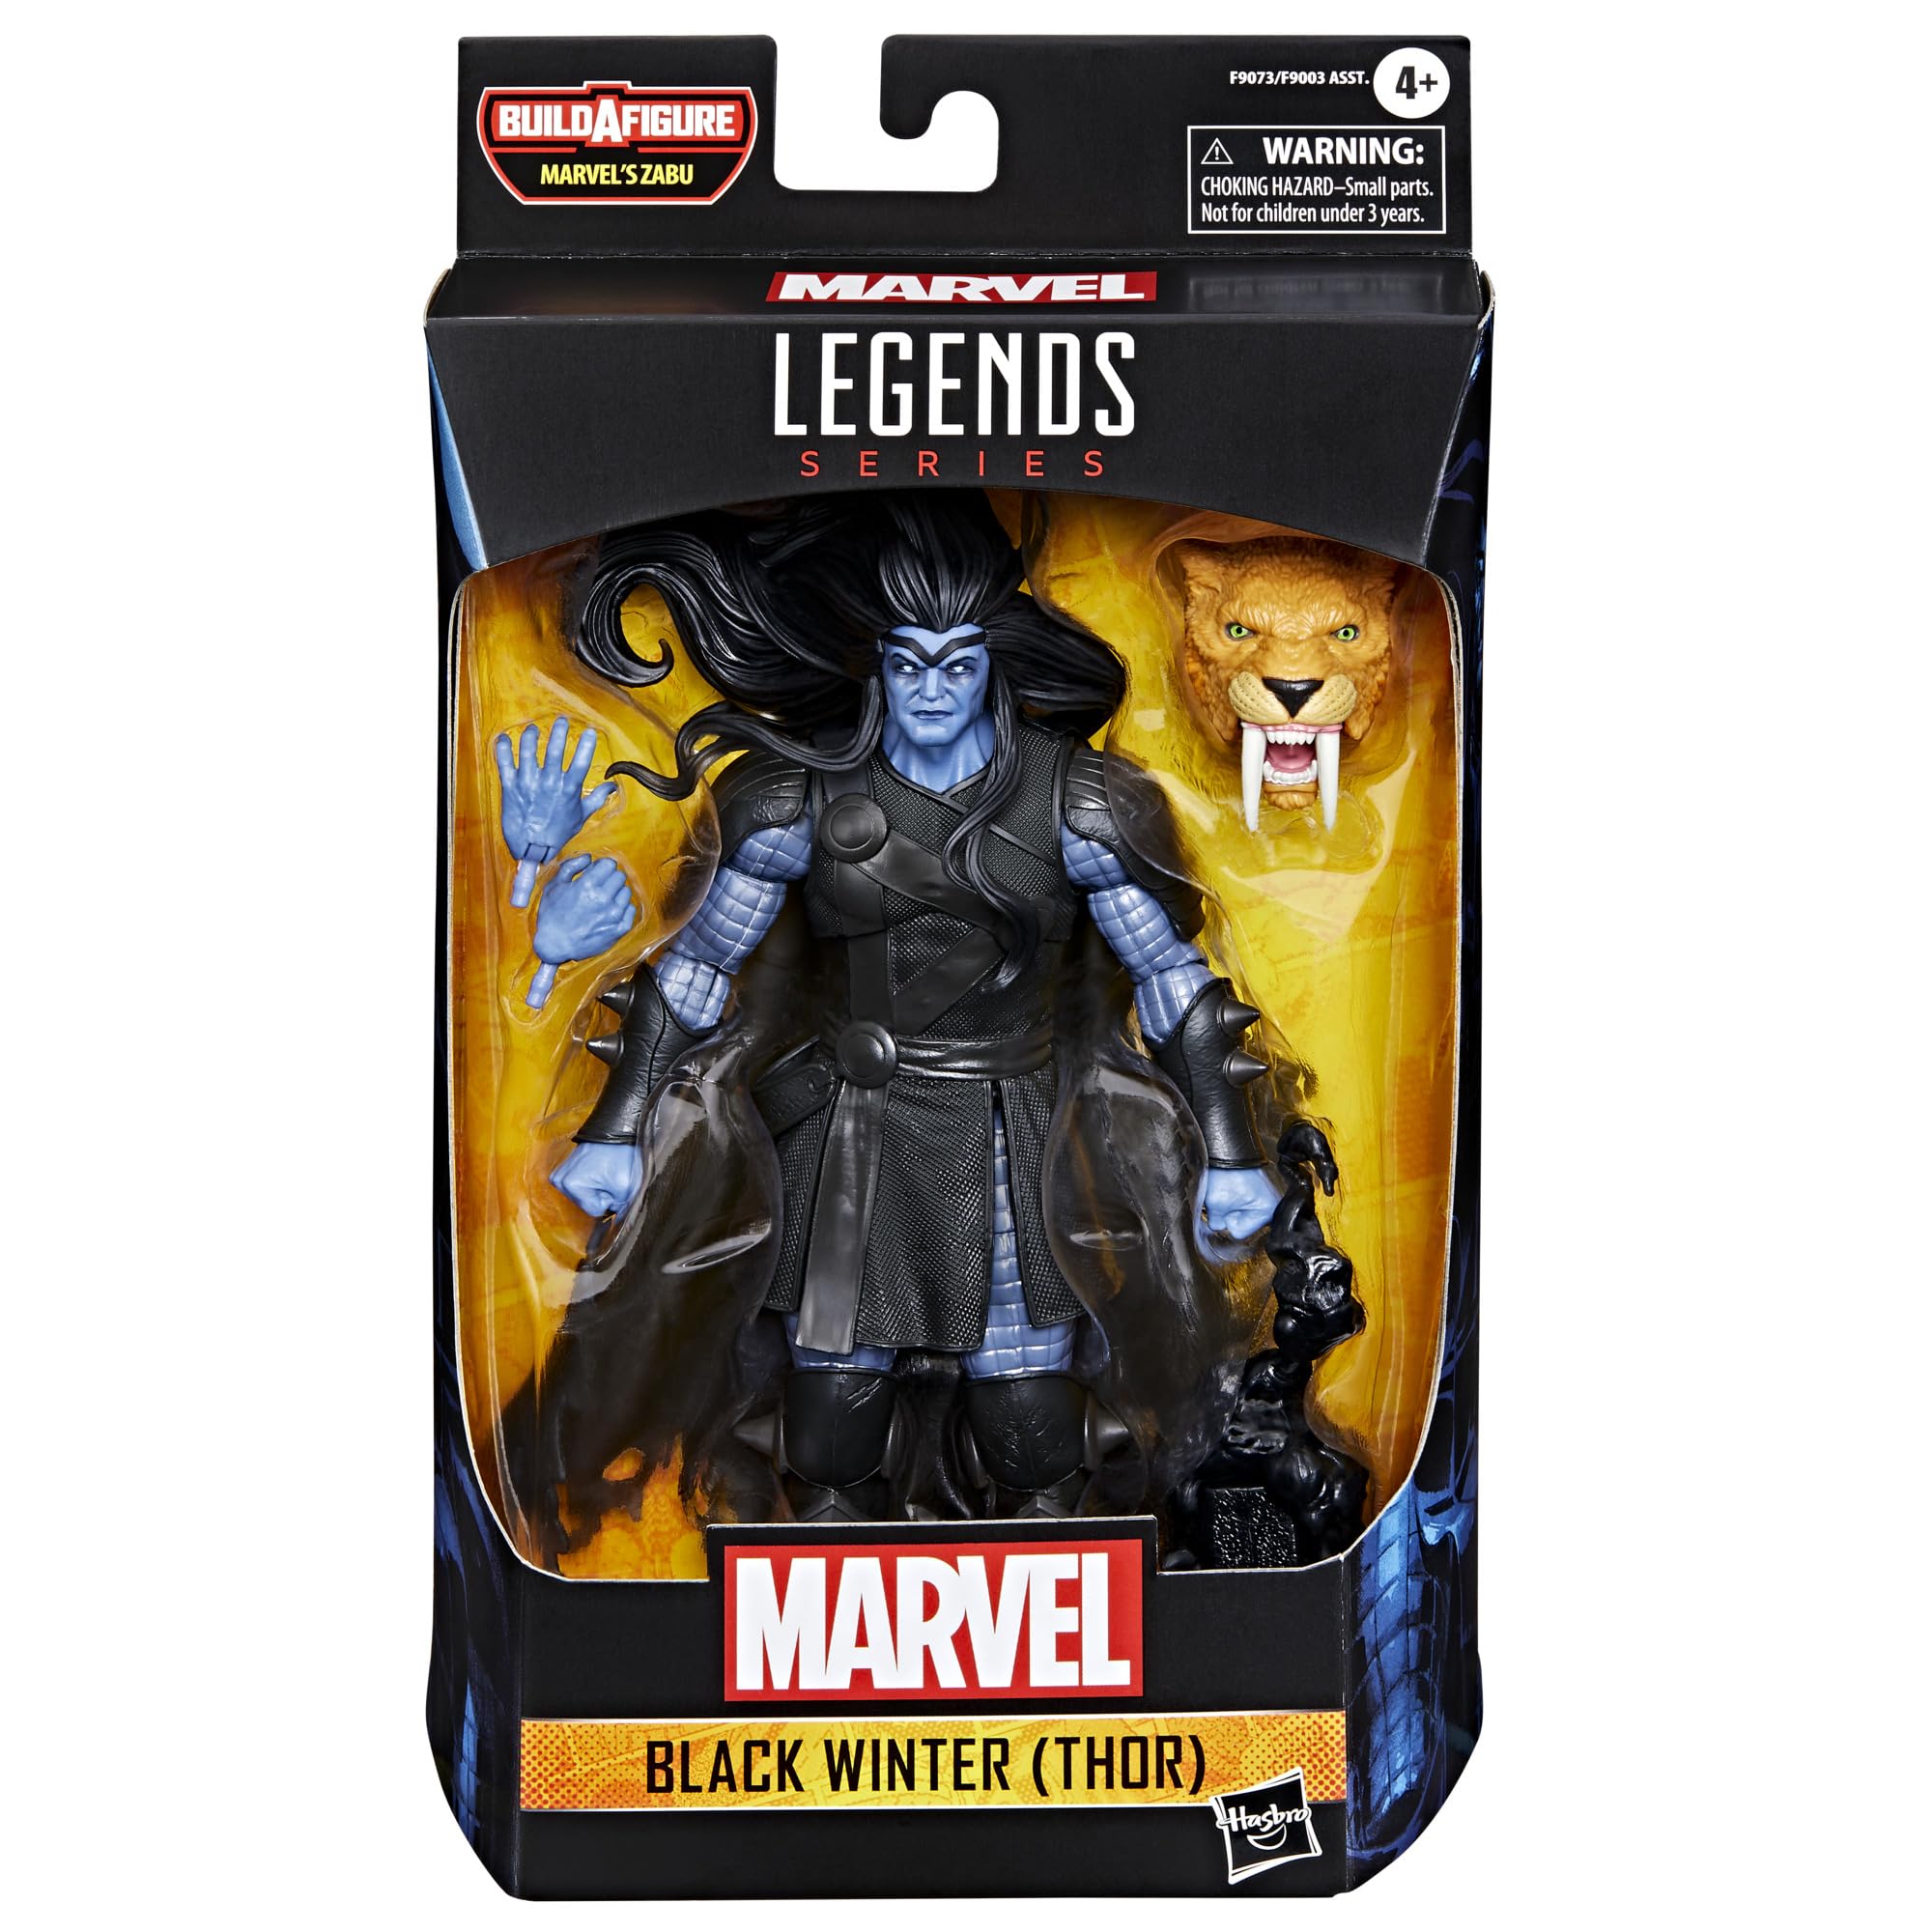 Marvel Legends Series Black Winter (Thor), Comics Collectible 6-Inch Action Figure with Build-A-Figure Part